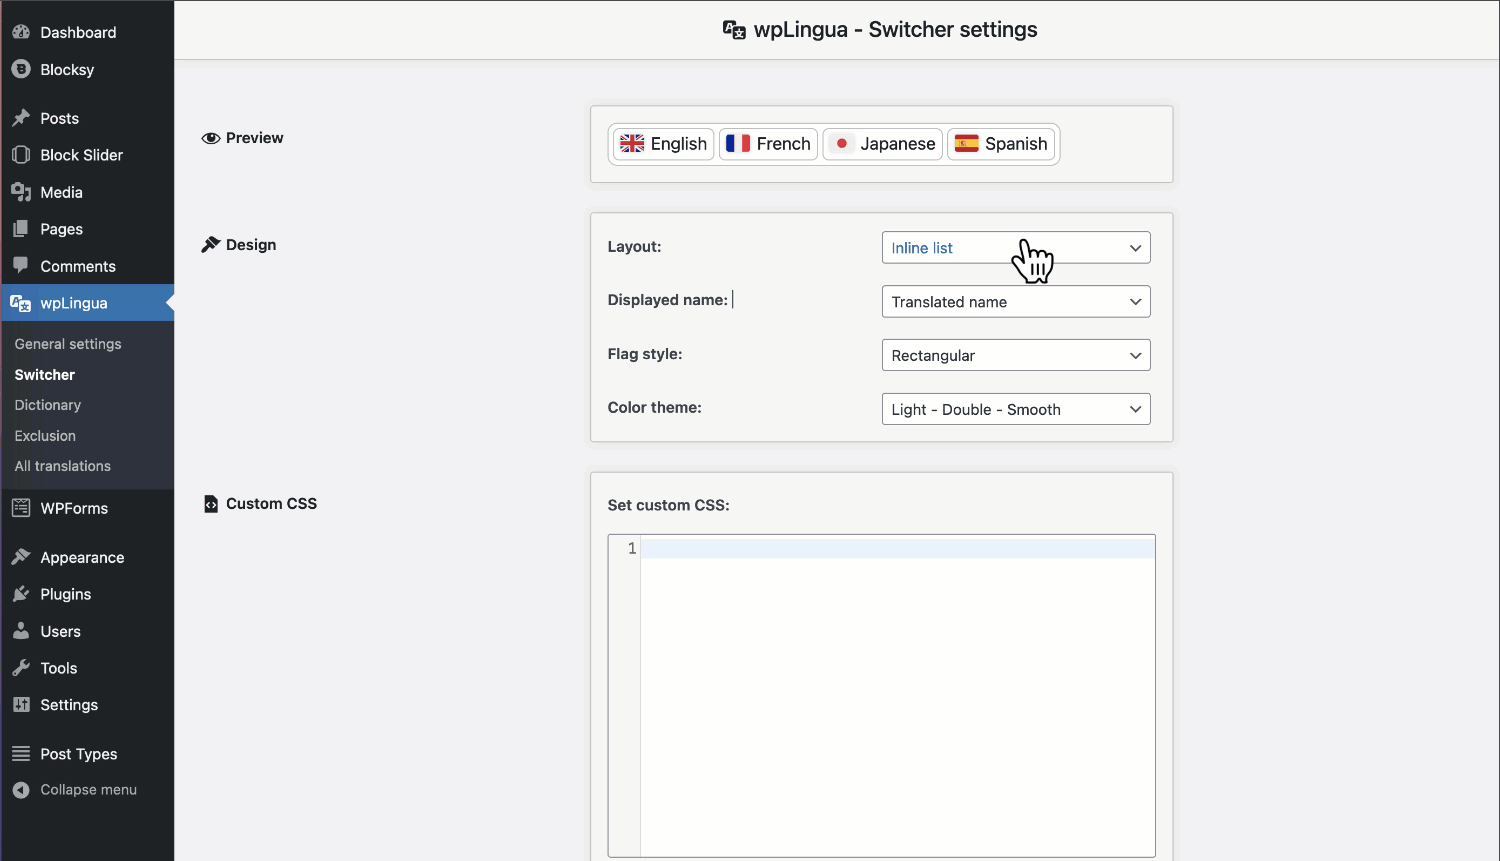 As soon as your API key has been registered, your site is multilingual. This option screen allows you to configure your languages and their flags, as well as activate the functionalities.